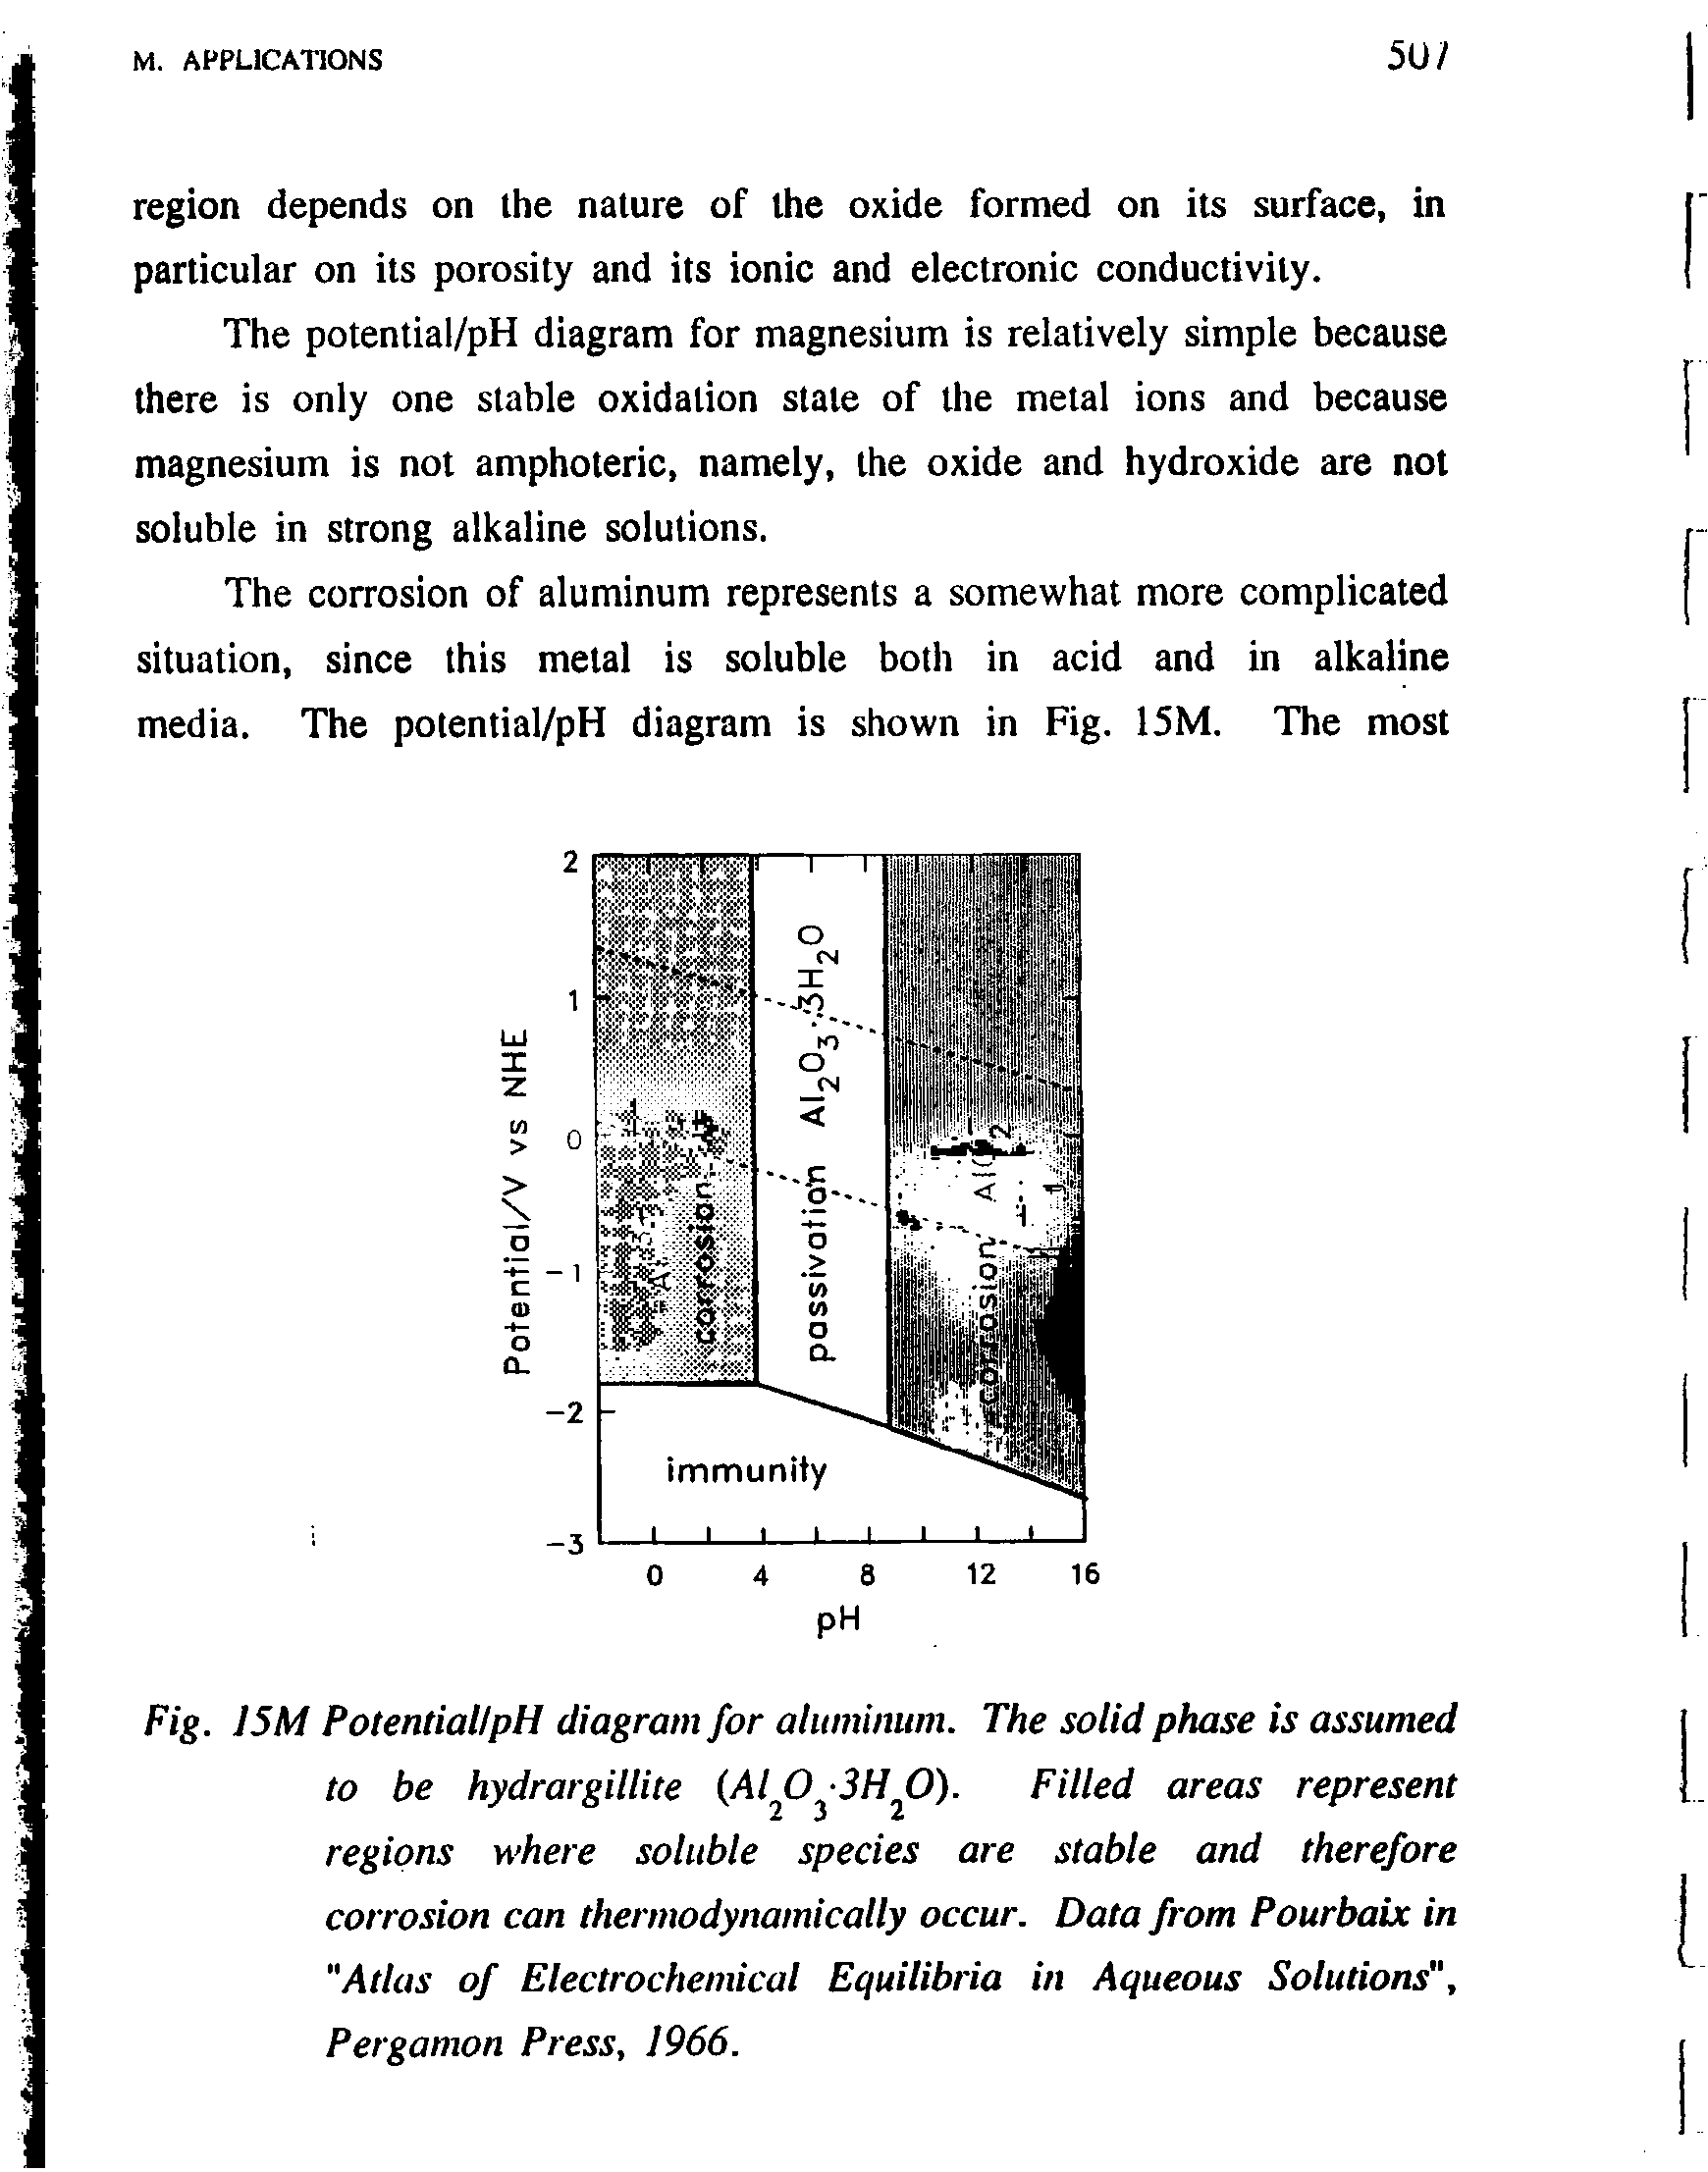 Fig. J5M Potential/pH diagram for aluminum. The solid phase is assumed to be hydrargillite (Al O -3H O). Filled areas represent regions where soluble species are stable and therefore corrosion can thermodynamically occur. Data from Pourbaix in Atlas of Electrochemical Equilibria in Aqueous Solutions", Pergamon Press, 1966.